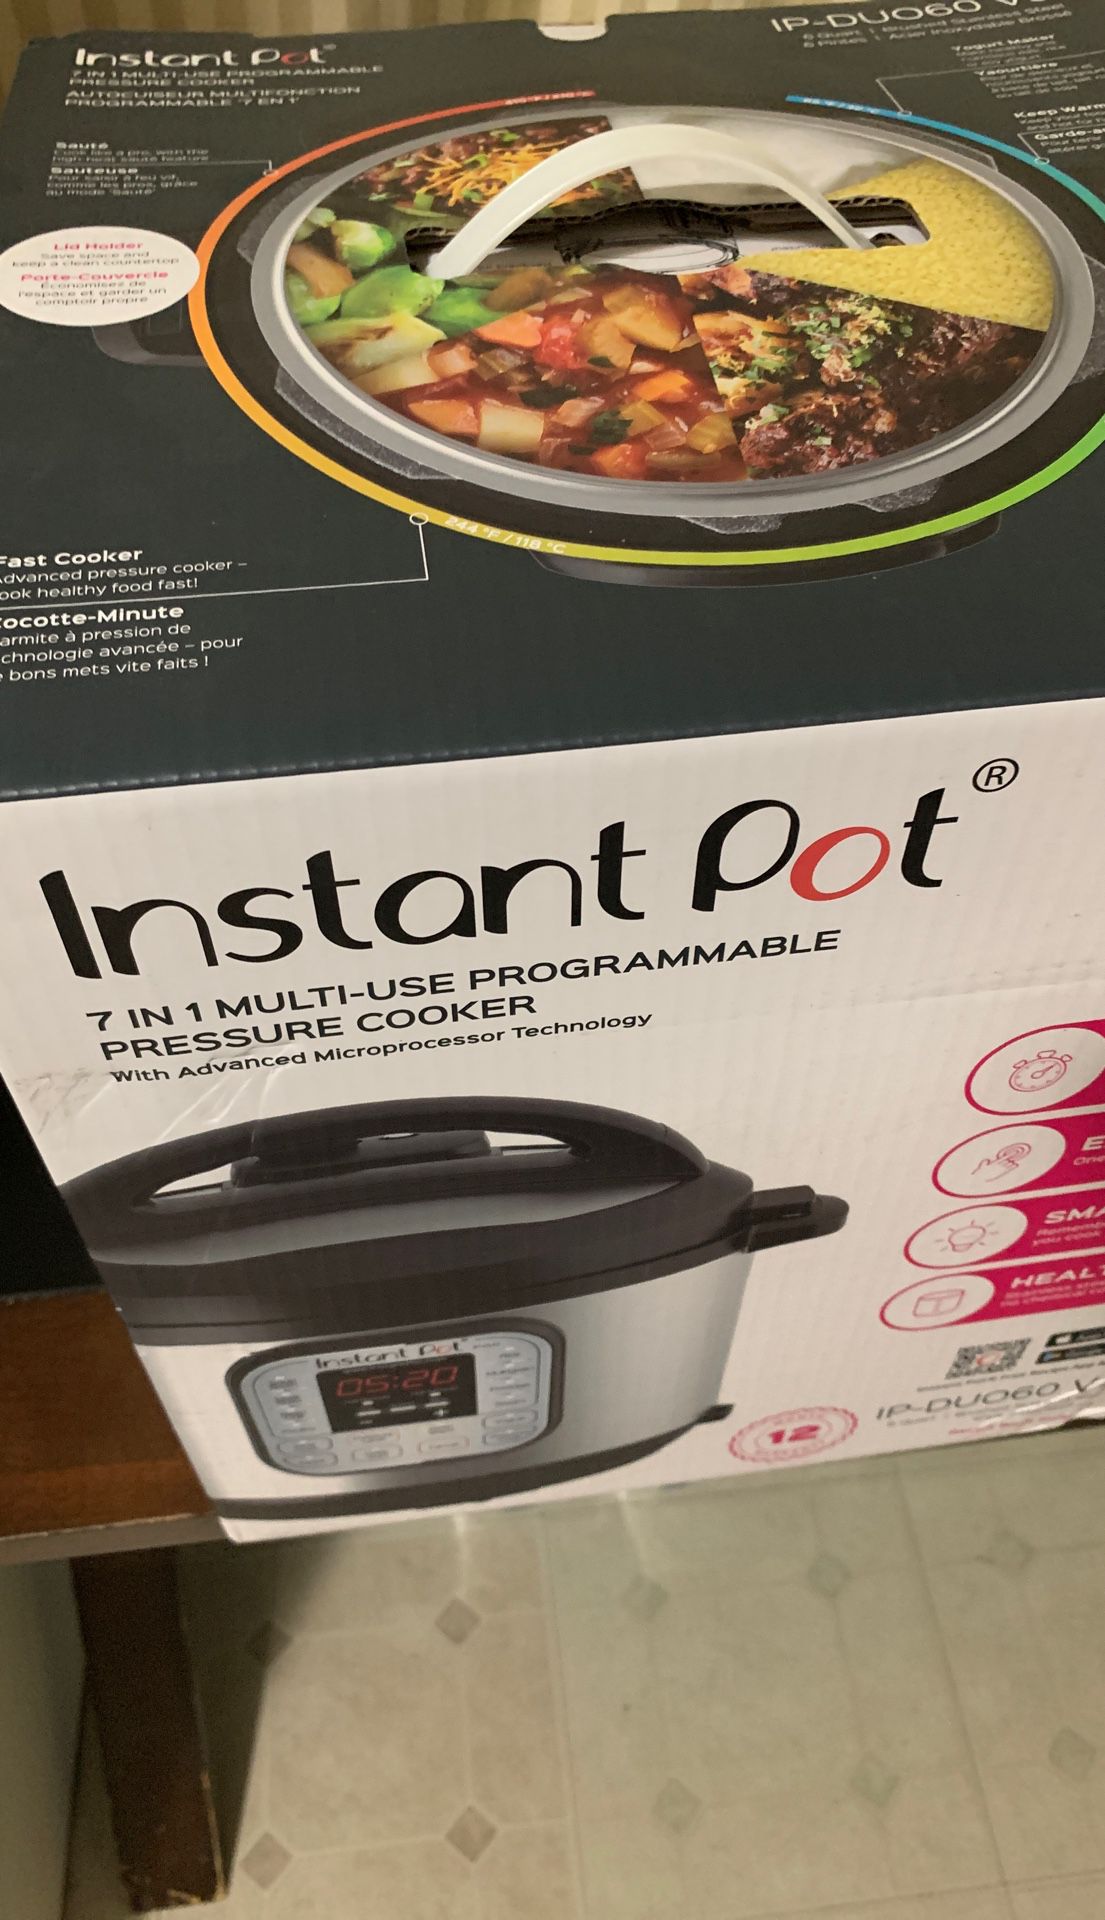 Instant pot model # ip-duo060 v3 never opened